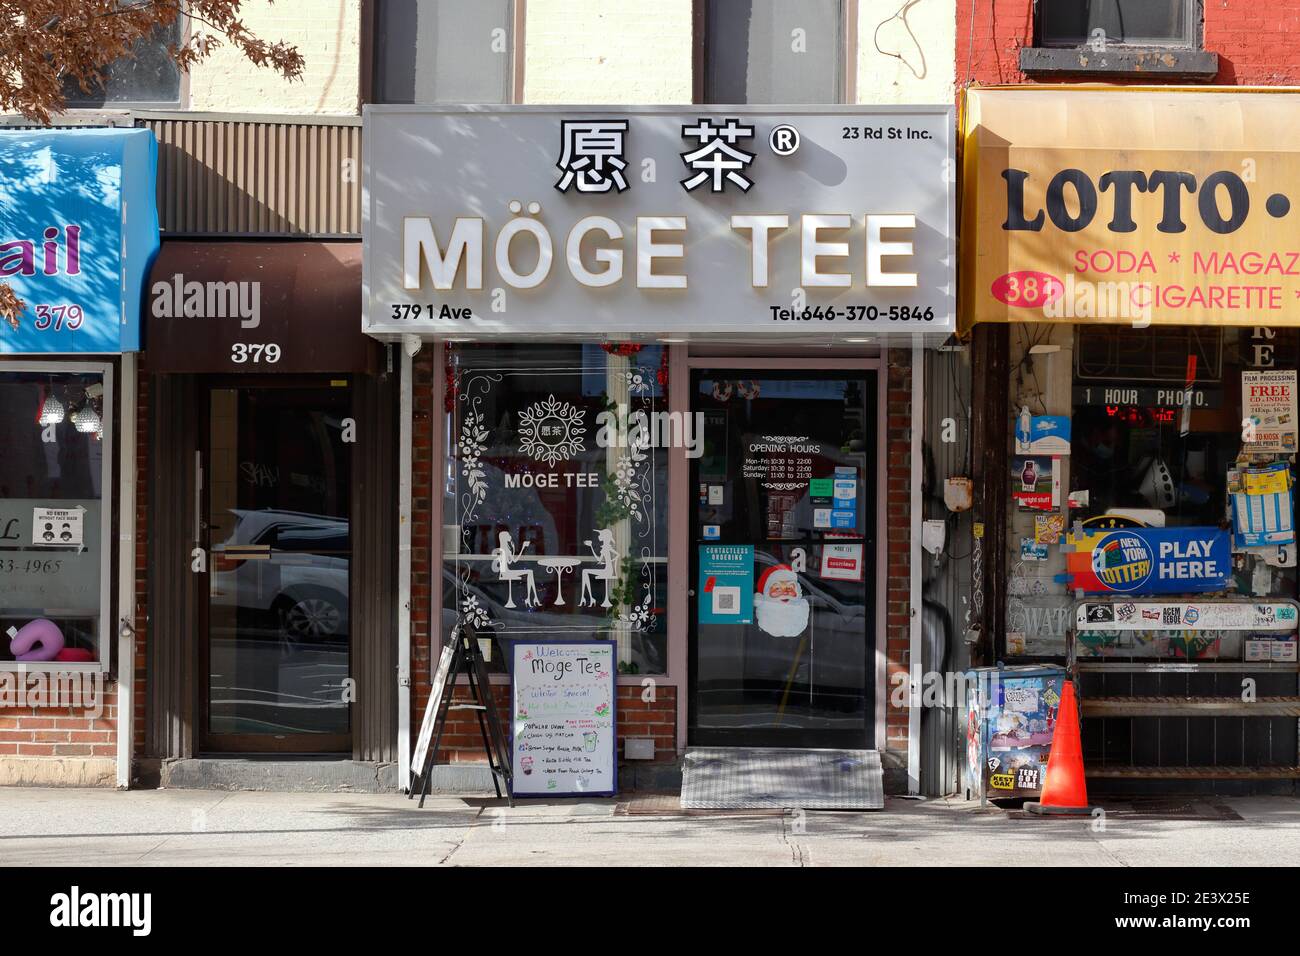 Möge Tee 愿茶, 379 First Ave, New York, NY. exterior storefront of a bubble tea shop in the Gramercy neighborhood of Manhattan Stock Photo